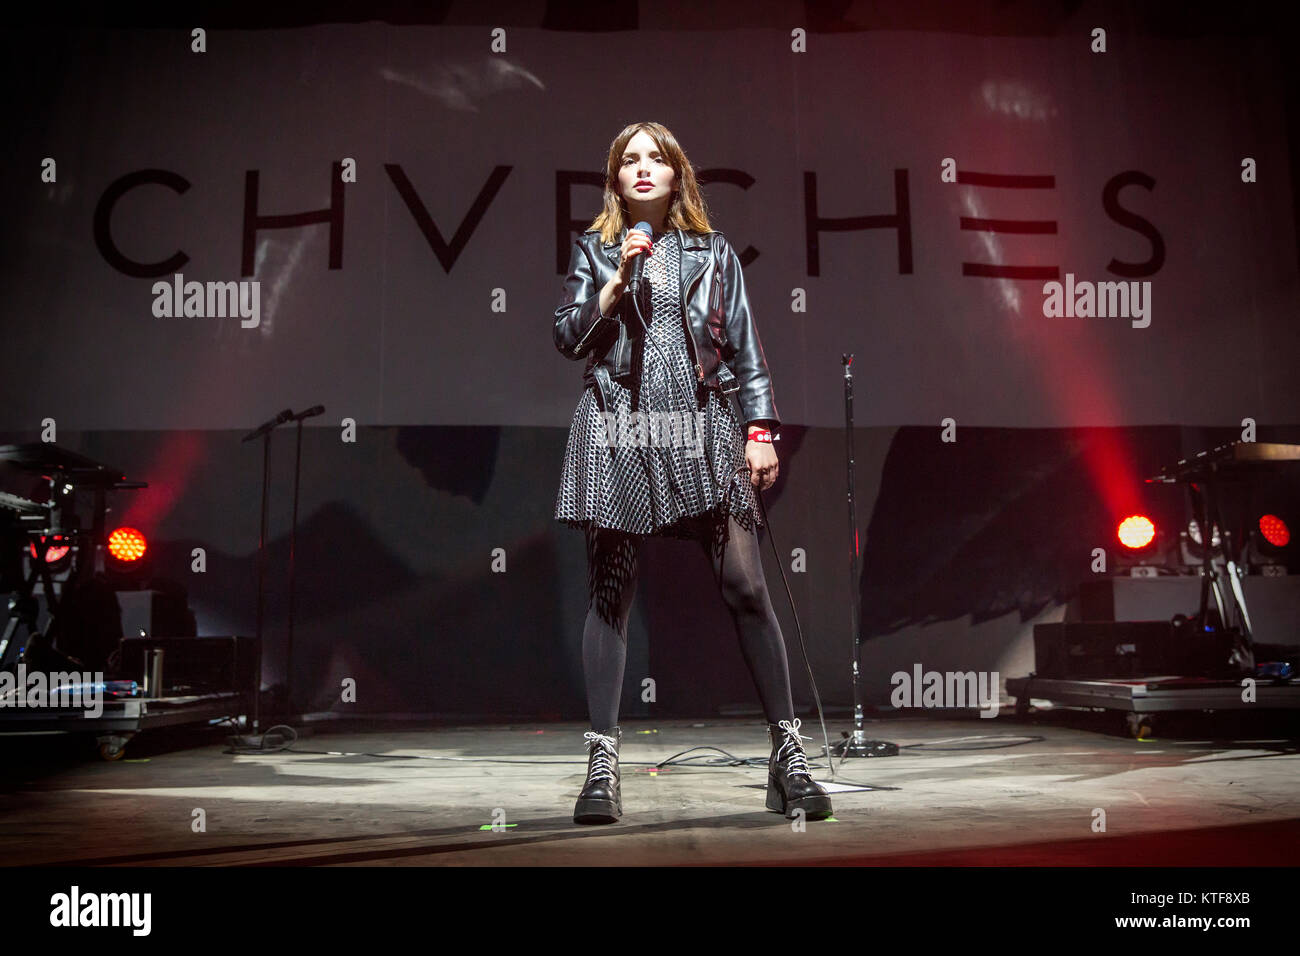 The Scottish electro- and synthpop band CHVRCHES (stylised as CHVRCHΞS) performs a live concert at the Norwegian music festival Øyafestivalen 2016 in Oslo. Here singer Lauren Mayberry is seen live on stage. Norway, 12/08 2016. Stock Photo